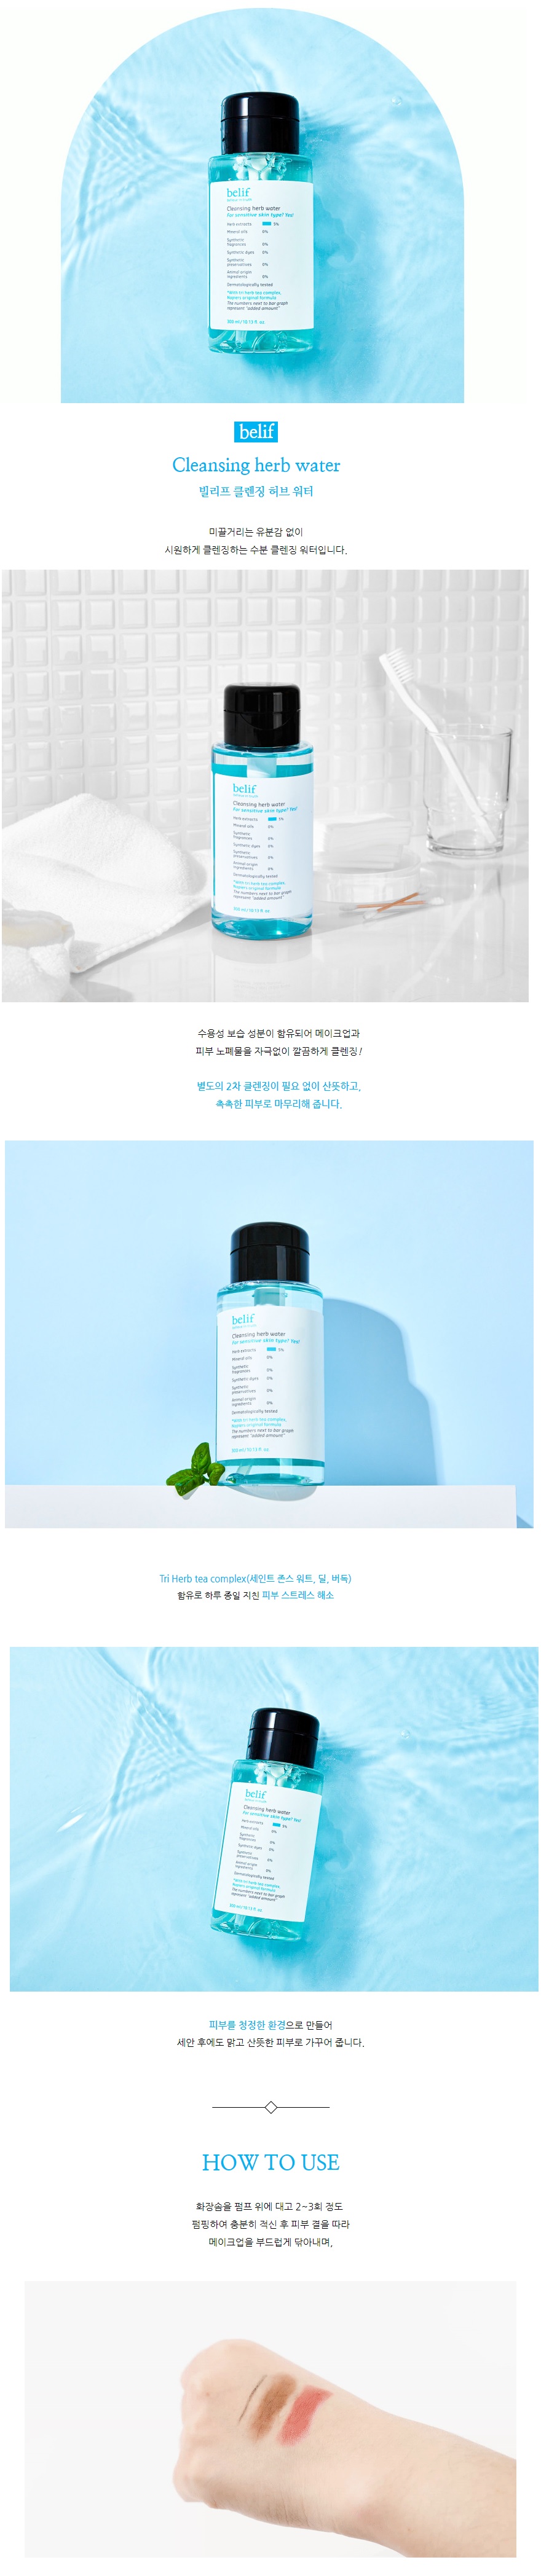 Belif Cleansing Herb Water korean skincare product online shop malaysia china india1